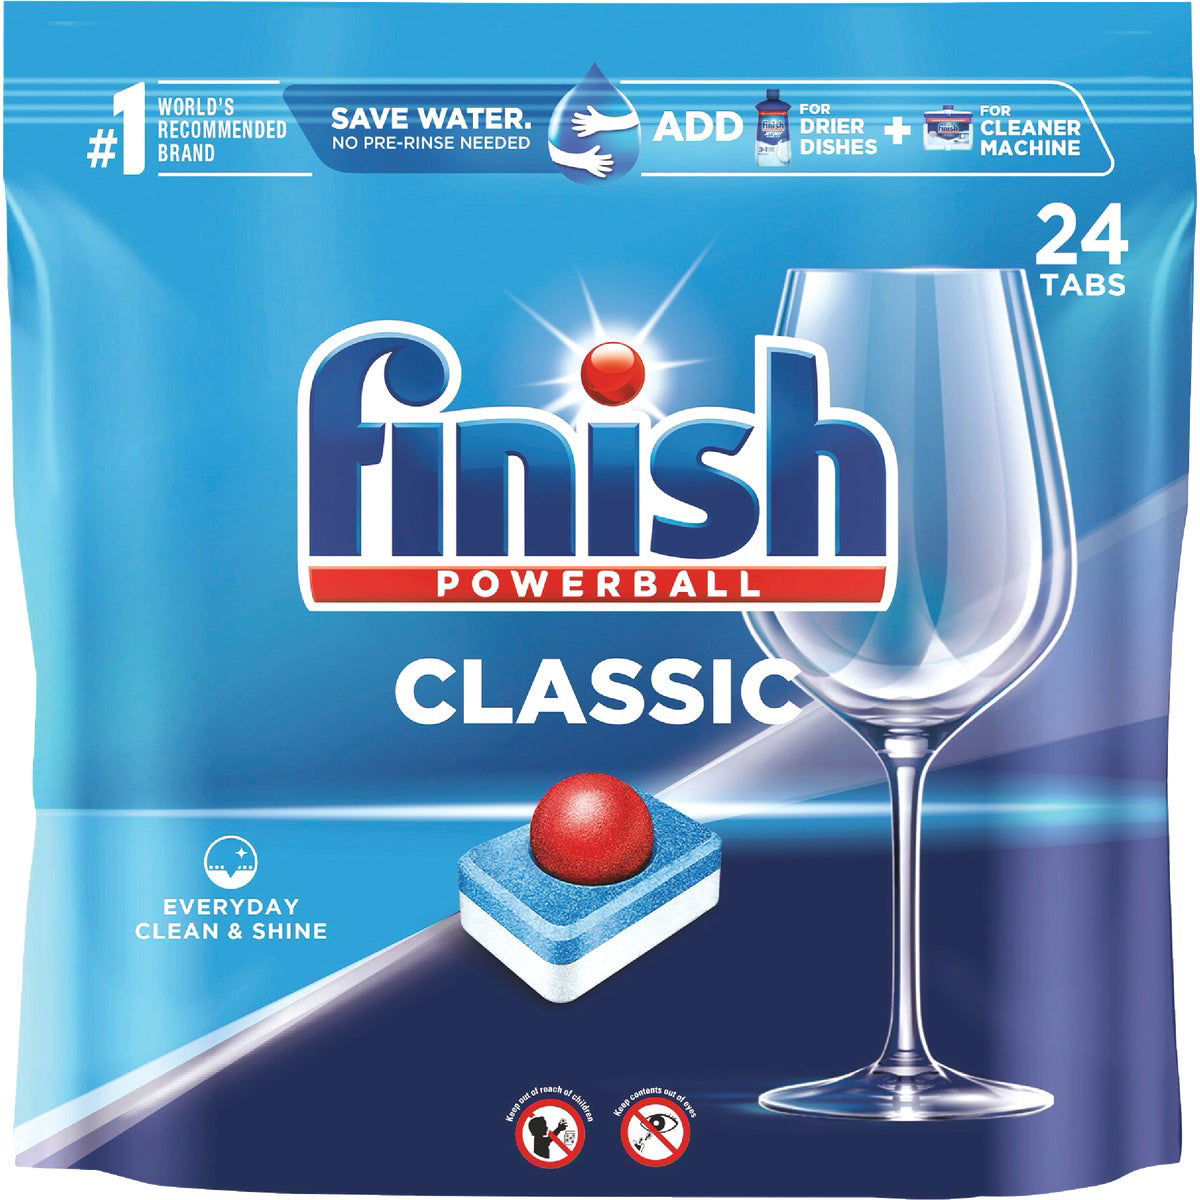 FINISH PowerBall All-in-One Dishwasher Detergent Tablet (24pcs